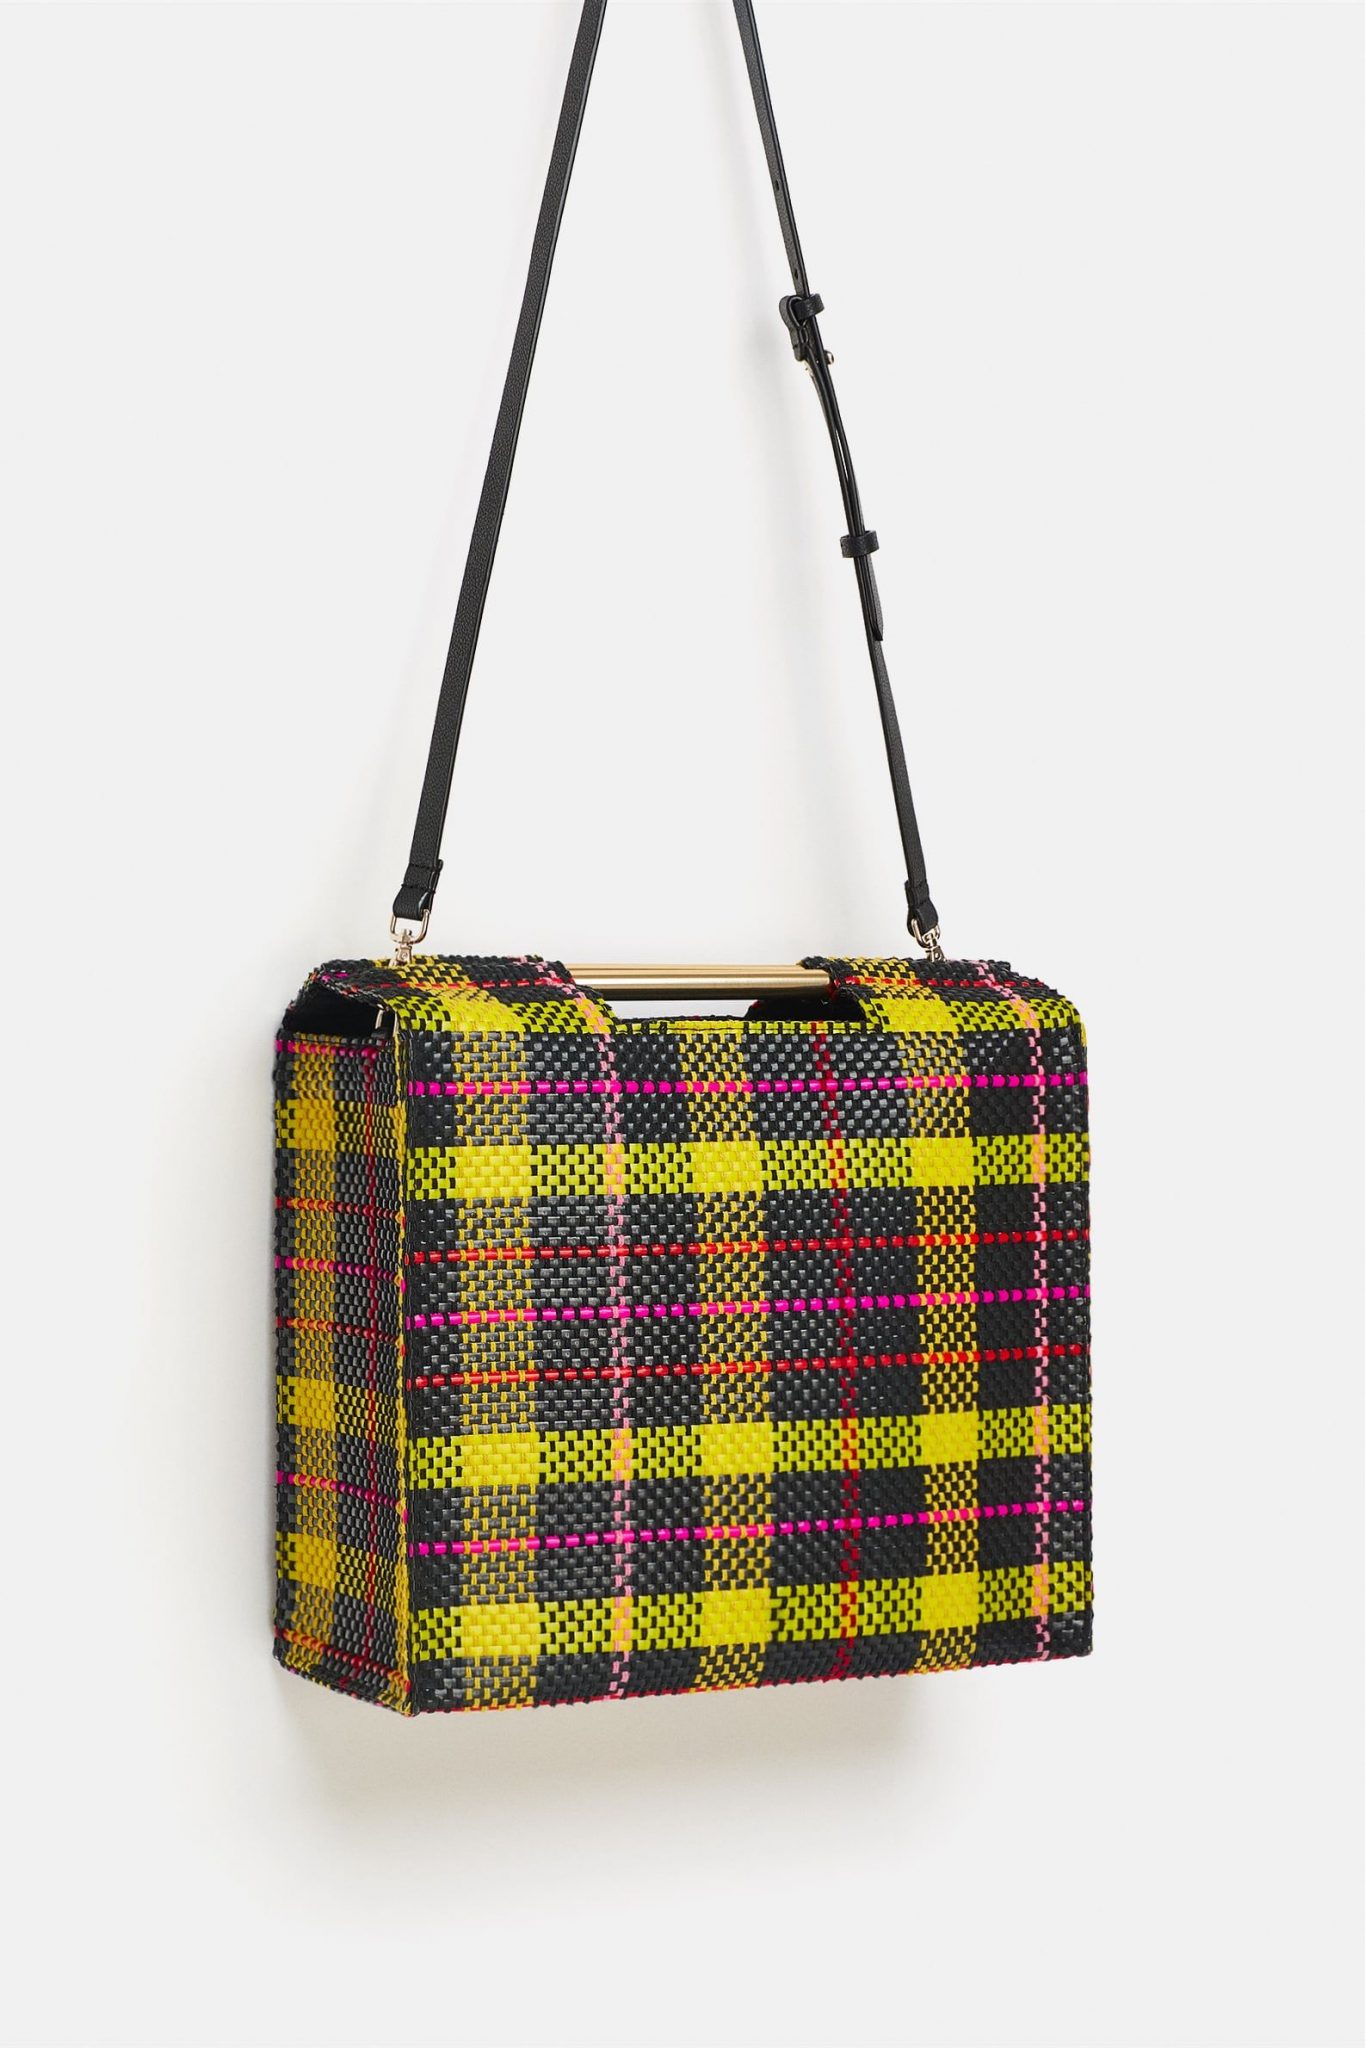 16 non-bulky totes perfect for carrying your laptop in